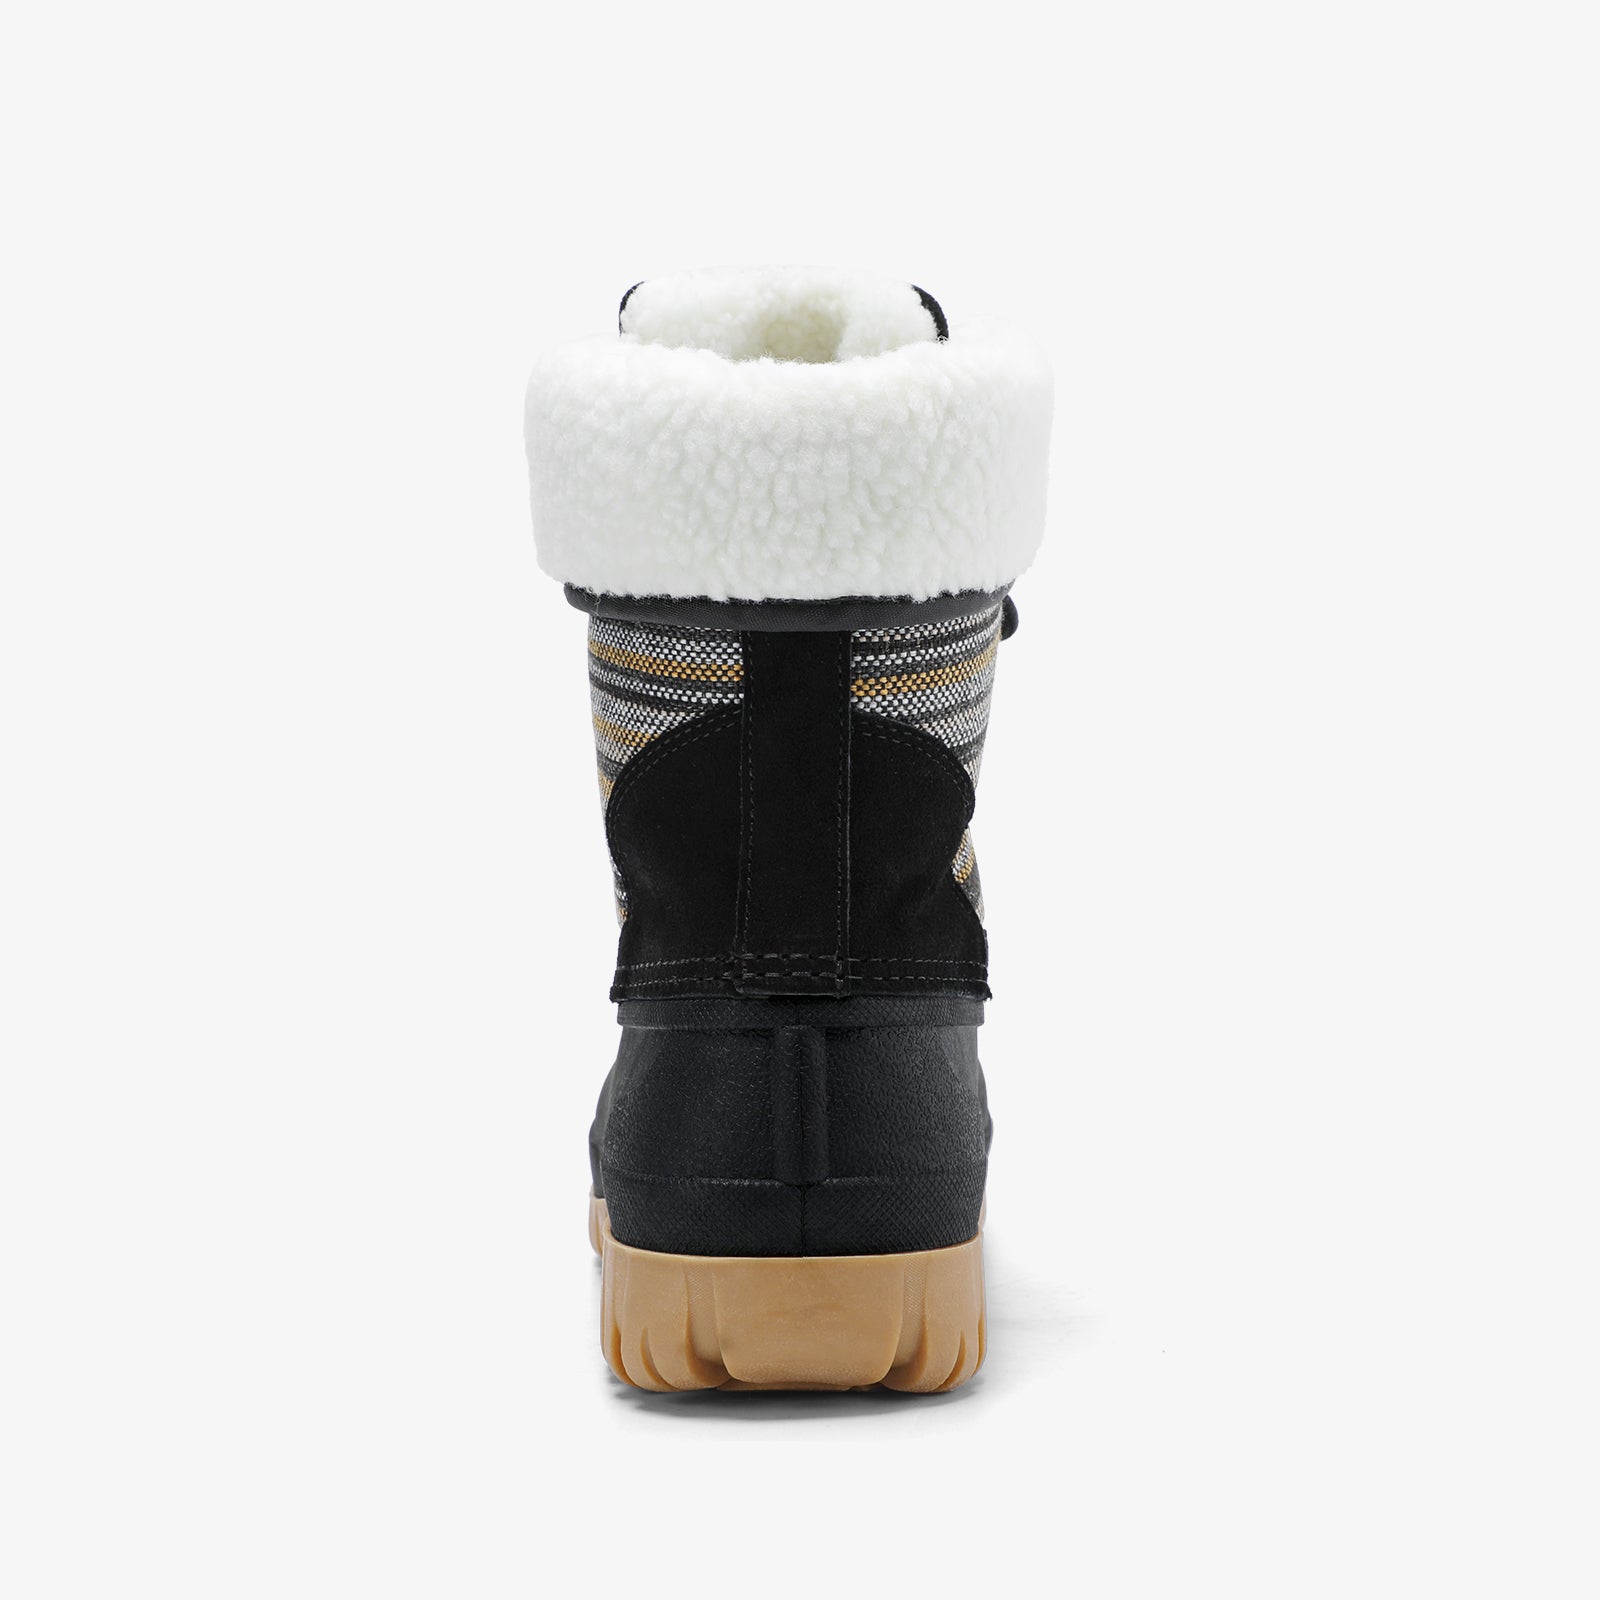 stq-winter-duck-boots-snow-fashion-boot-product-view